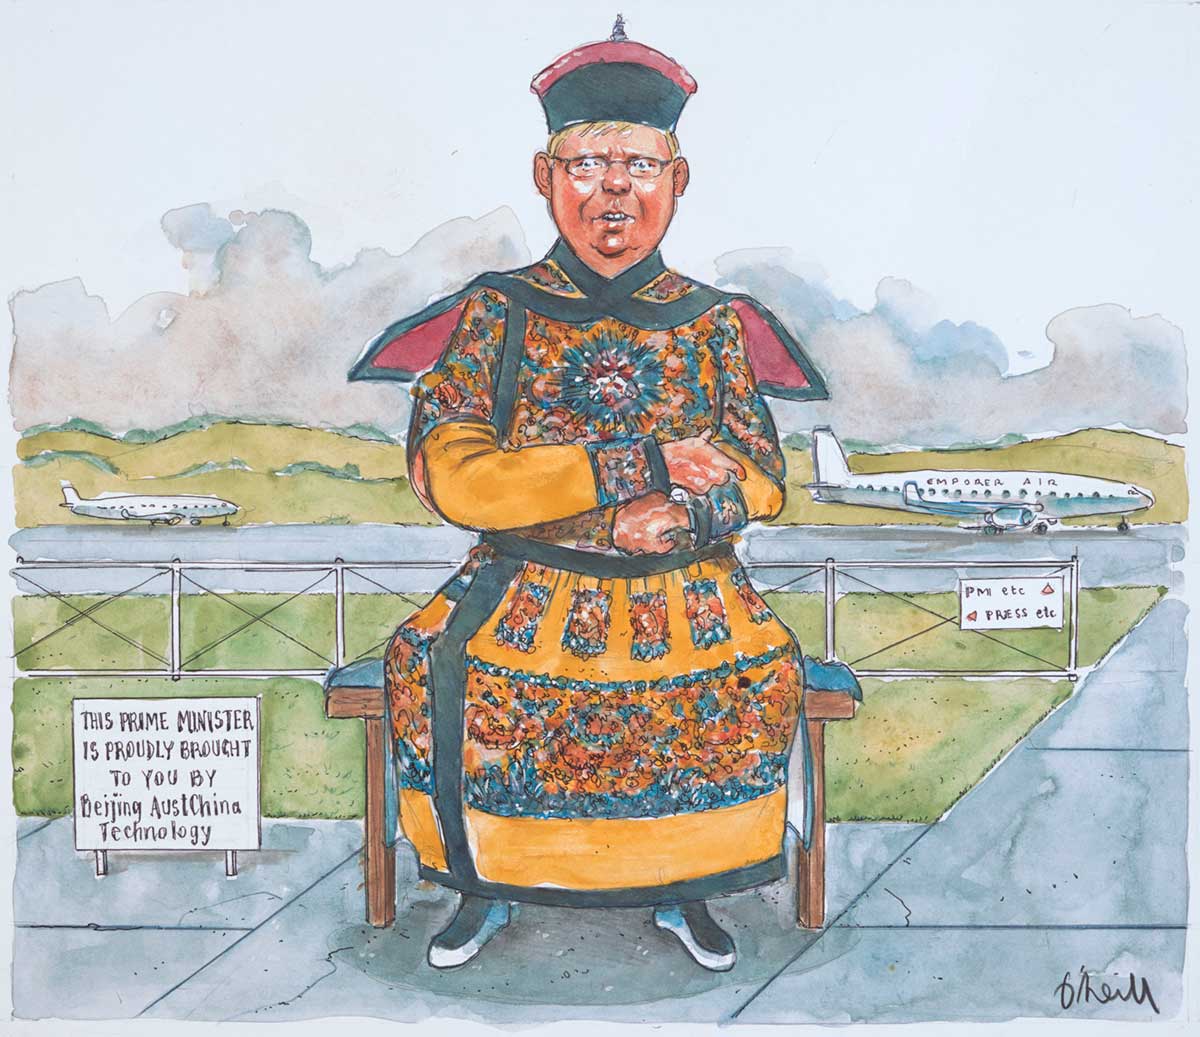 Political cartoon of Kevin Rudd, dressed in a traditional Chinese costume in shades of green, yellow and red. He sits on a stool beside a sign which says 'This Prime Minister is proudly brought to you by Beijing AustChina Technology'. An aeroplane marked 'Emporer (sic) Air' sits on a runway in the background. A sign saying 'PM etc' points to the runway while another arrow directs 'PRESS etc' behind a fence. - click to view larger image